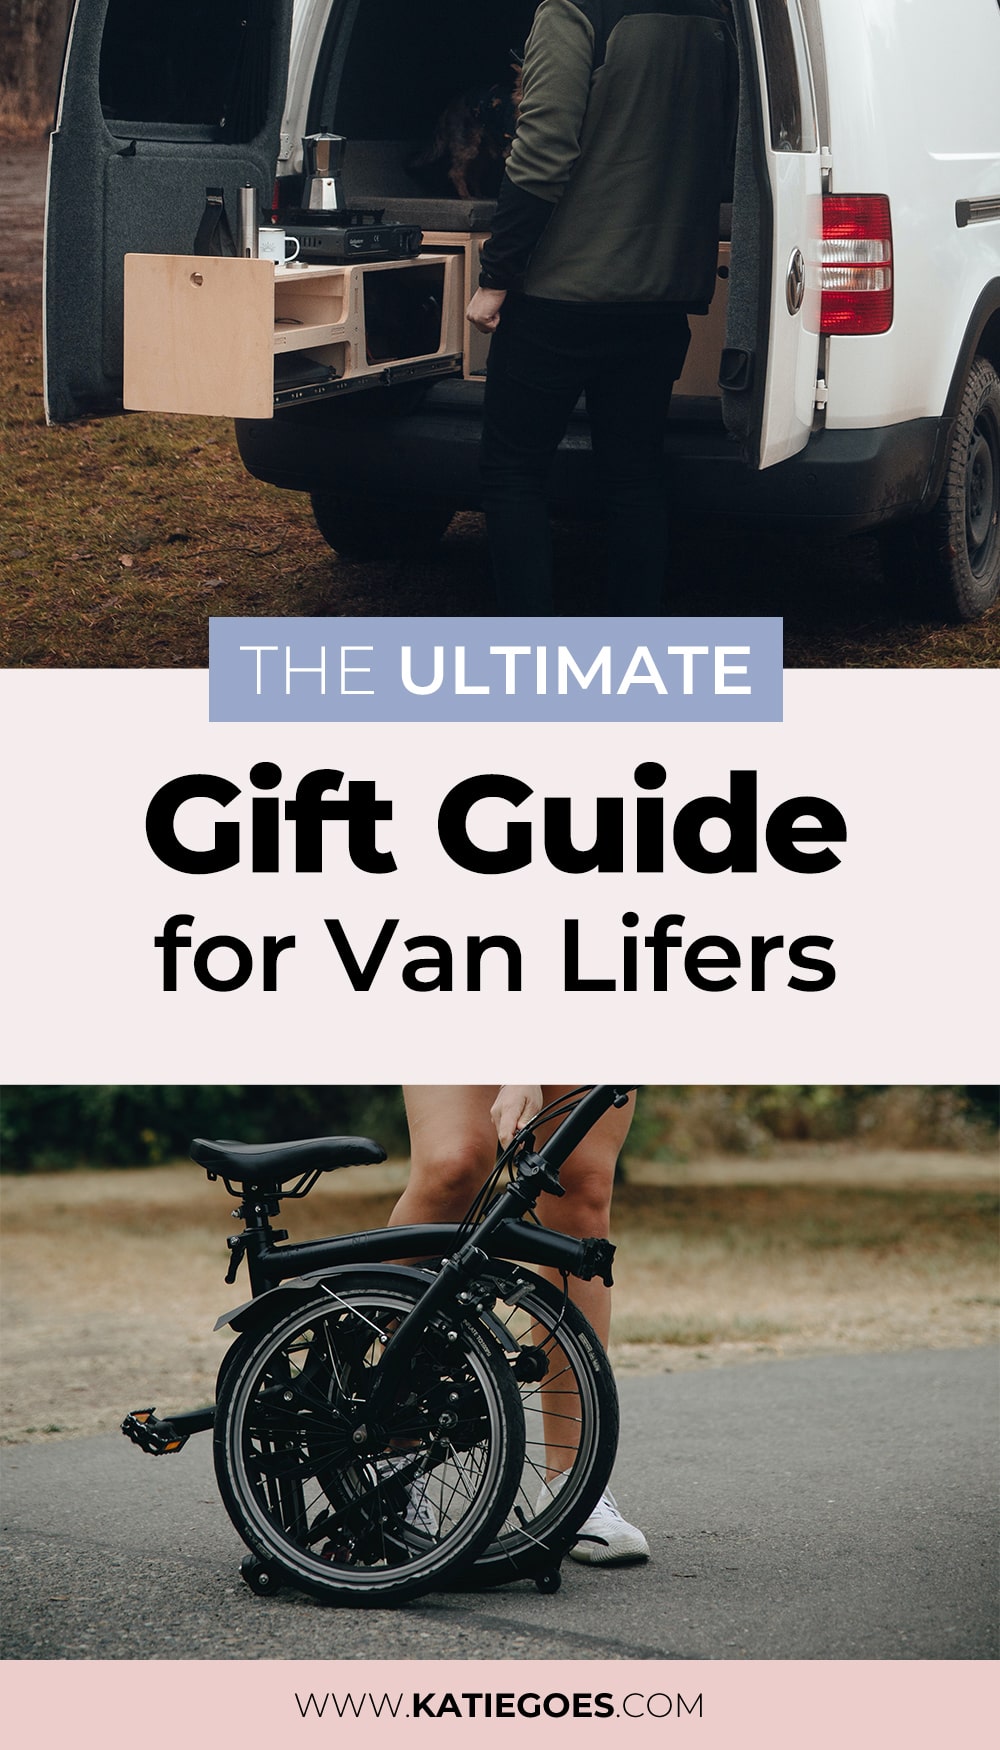 Van Life Gifts: The Ultimate Gift Guide for Van Lifers